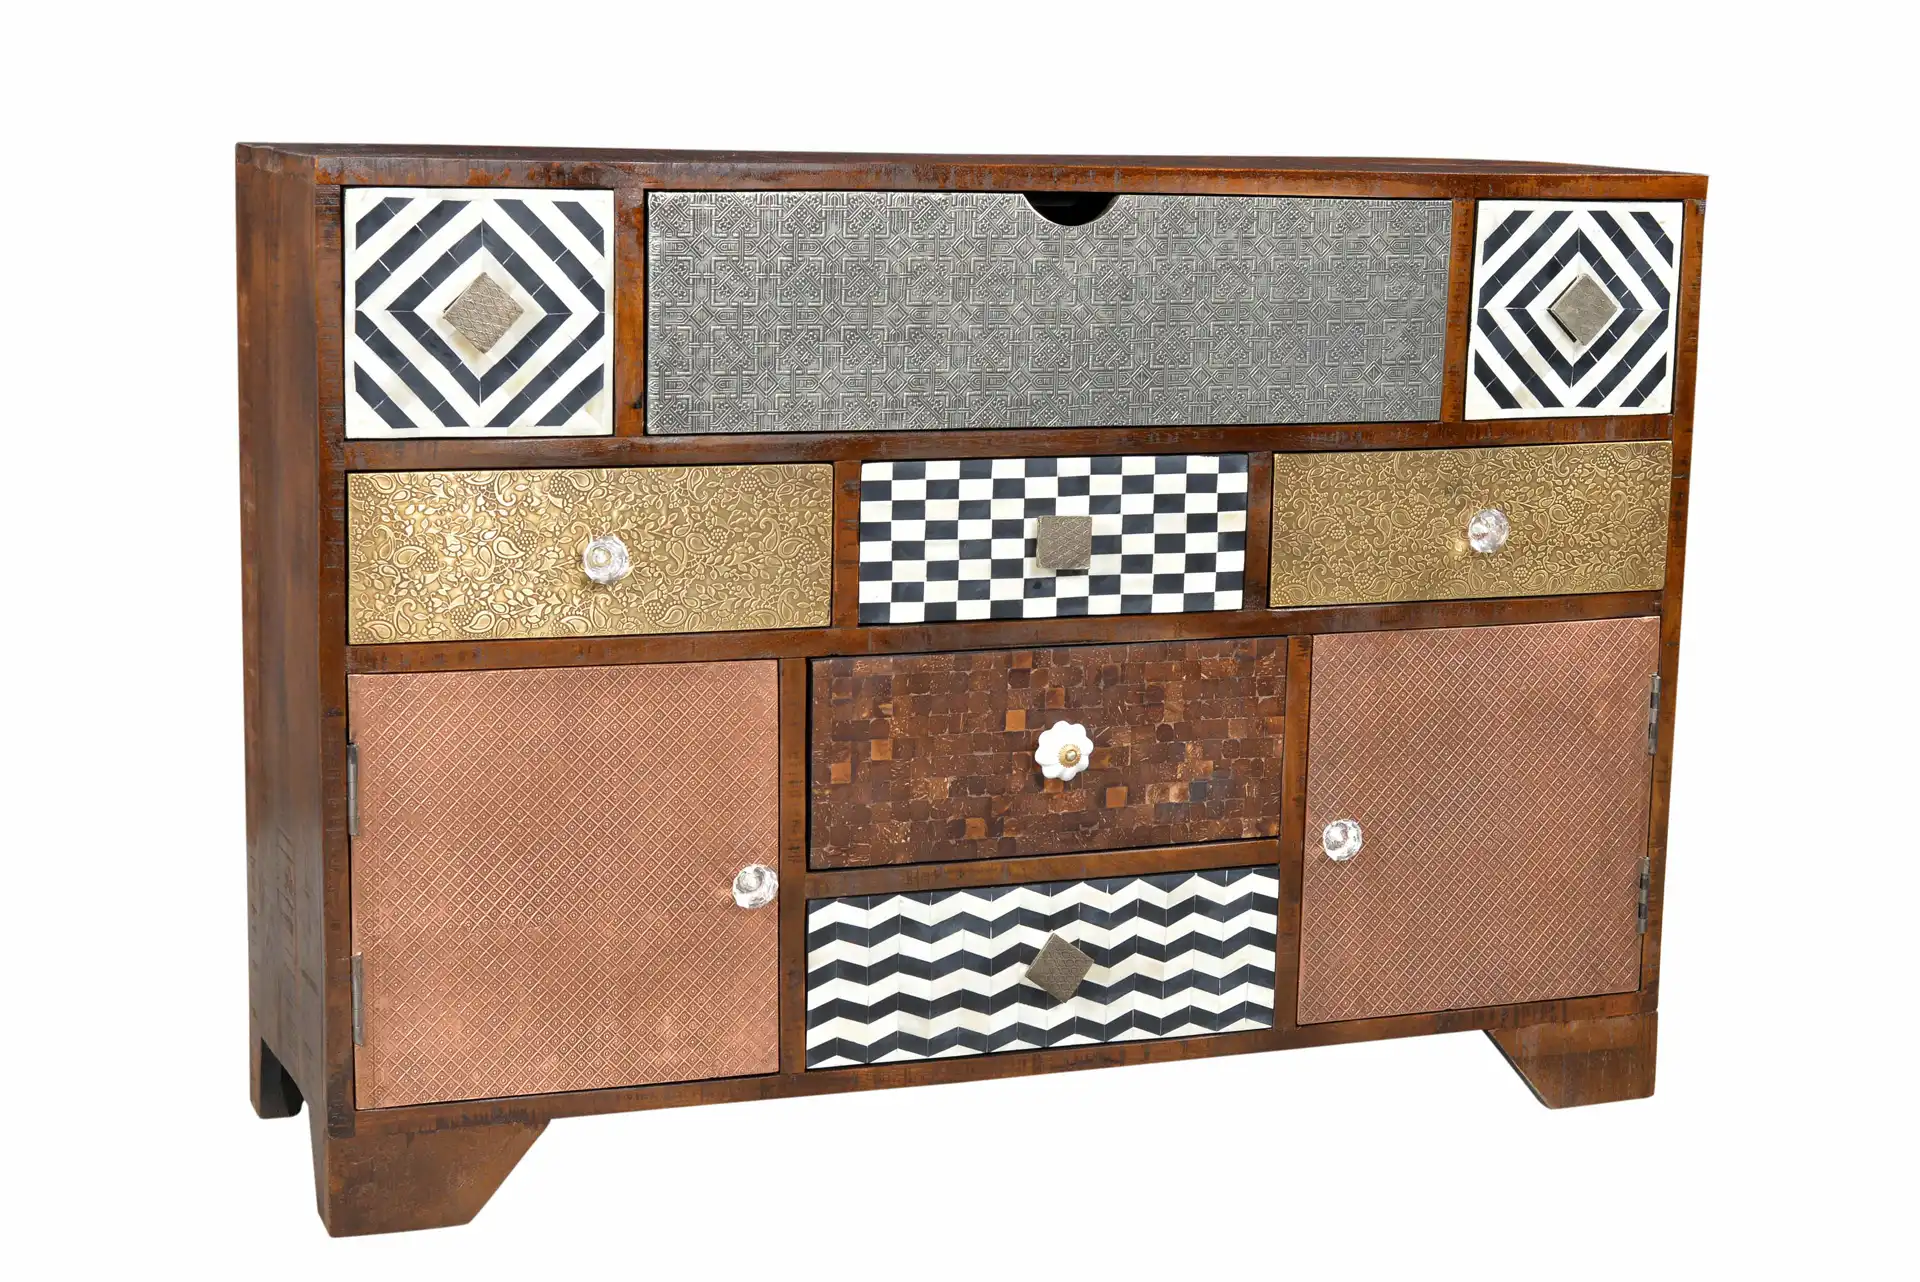 Wooden Sideboard with 14 Drawers - popular handicrafts